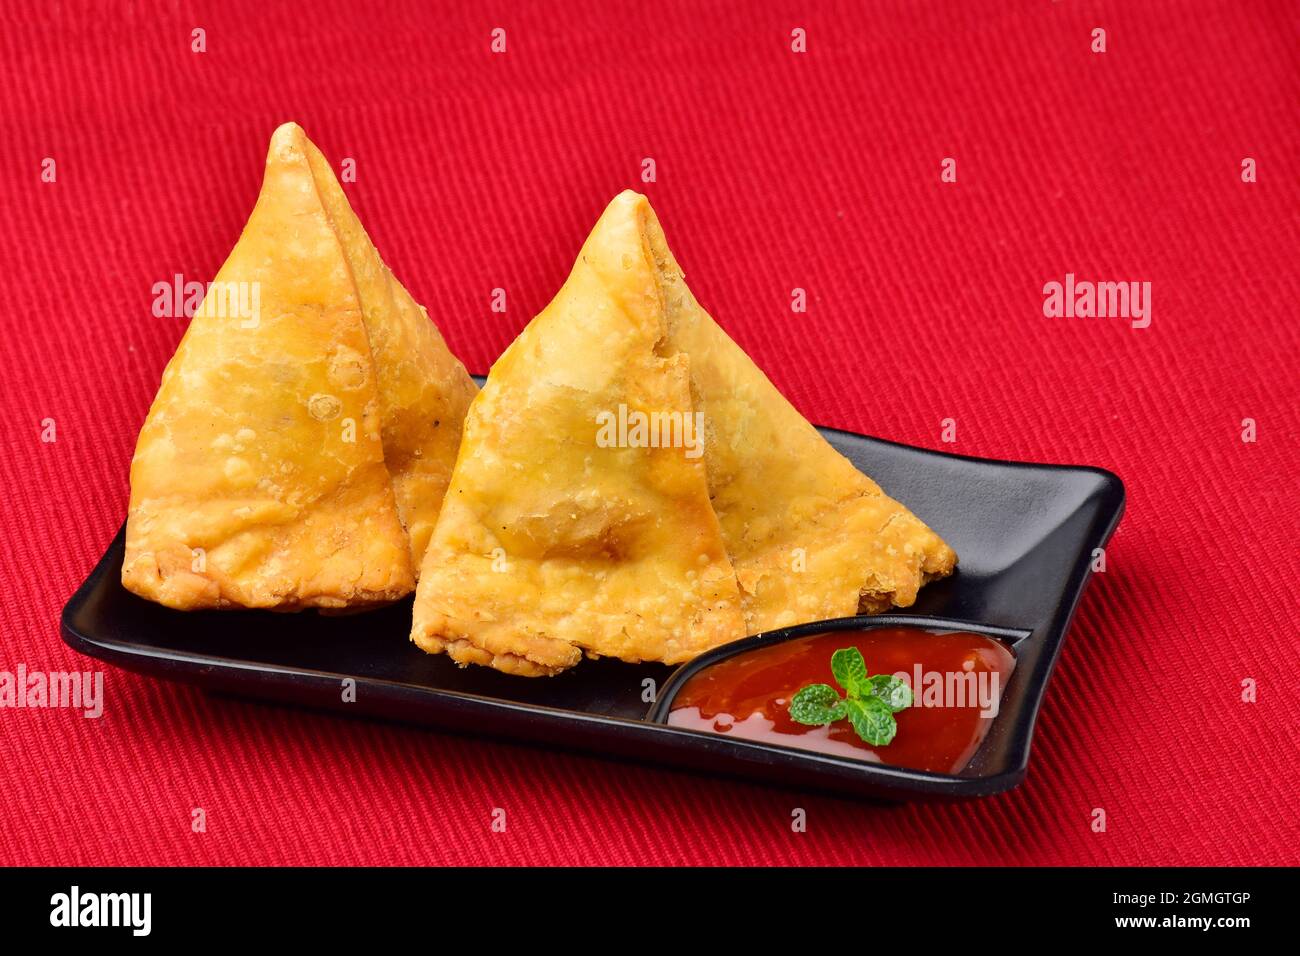 Stuffed Samosas with Ketchup in Plate, Tasty Asian Snack Samosa Stock Photo